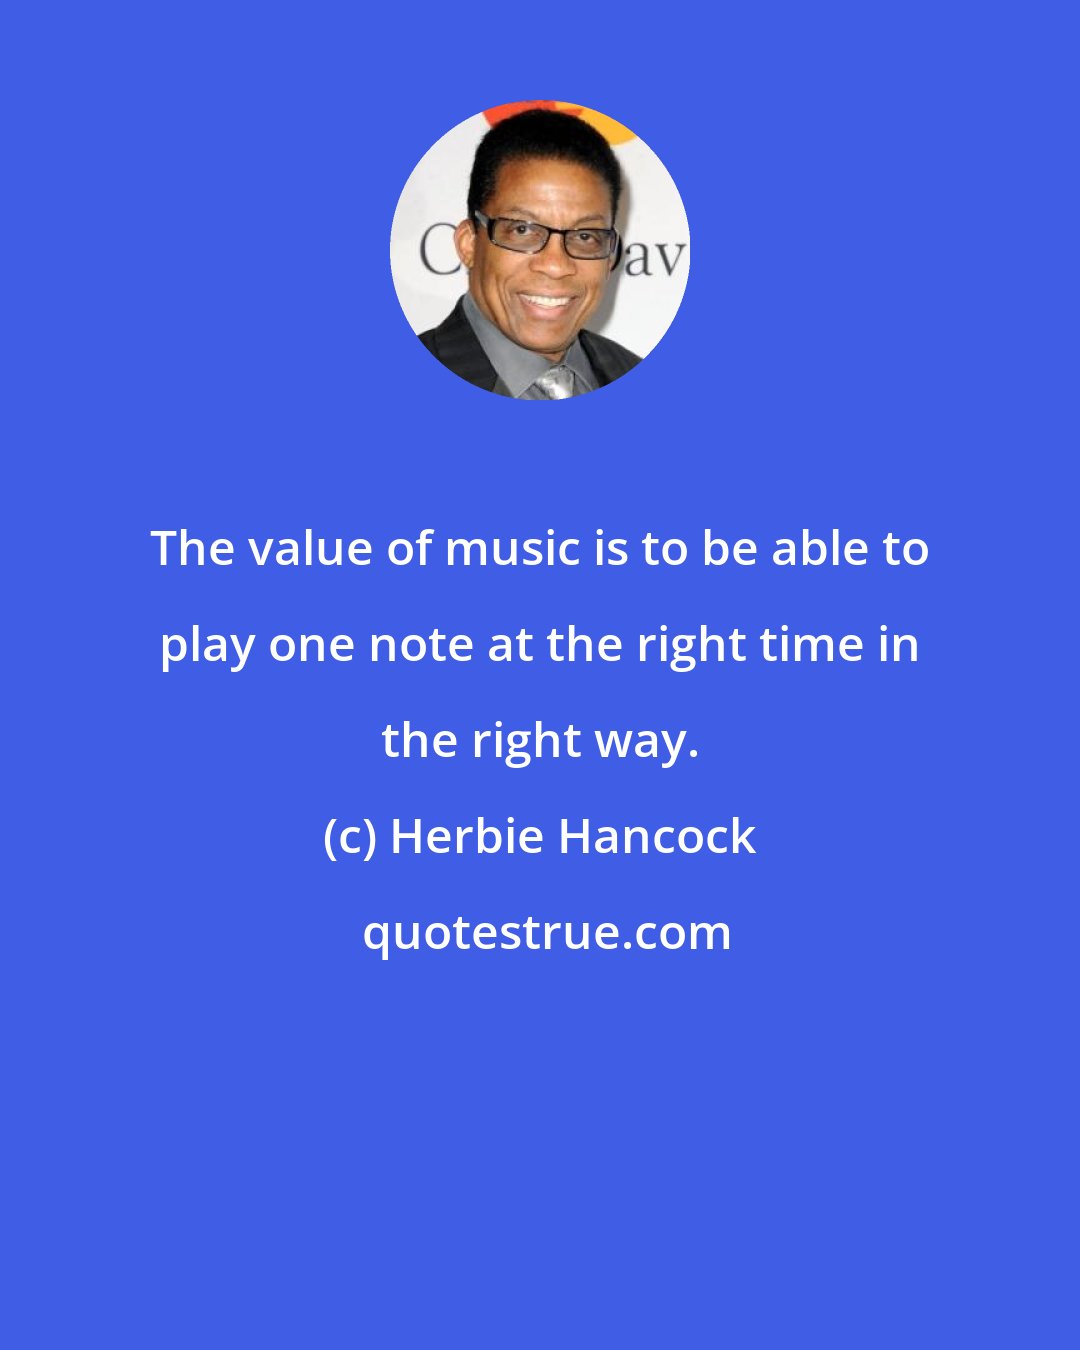 Herbie Hancock: The value of music is to be able to play one note at the right time in the right way.